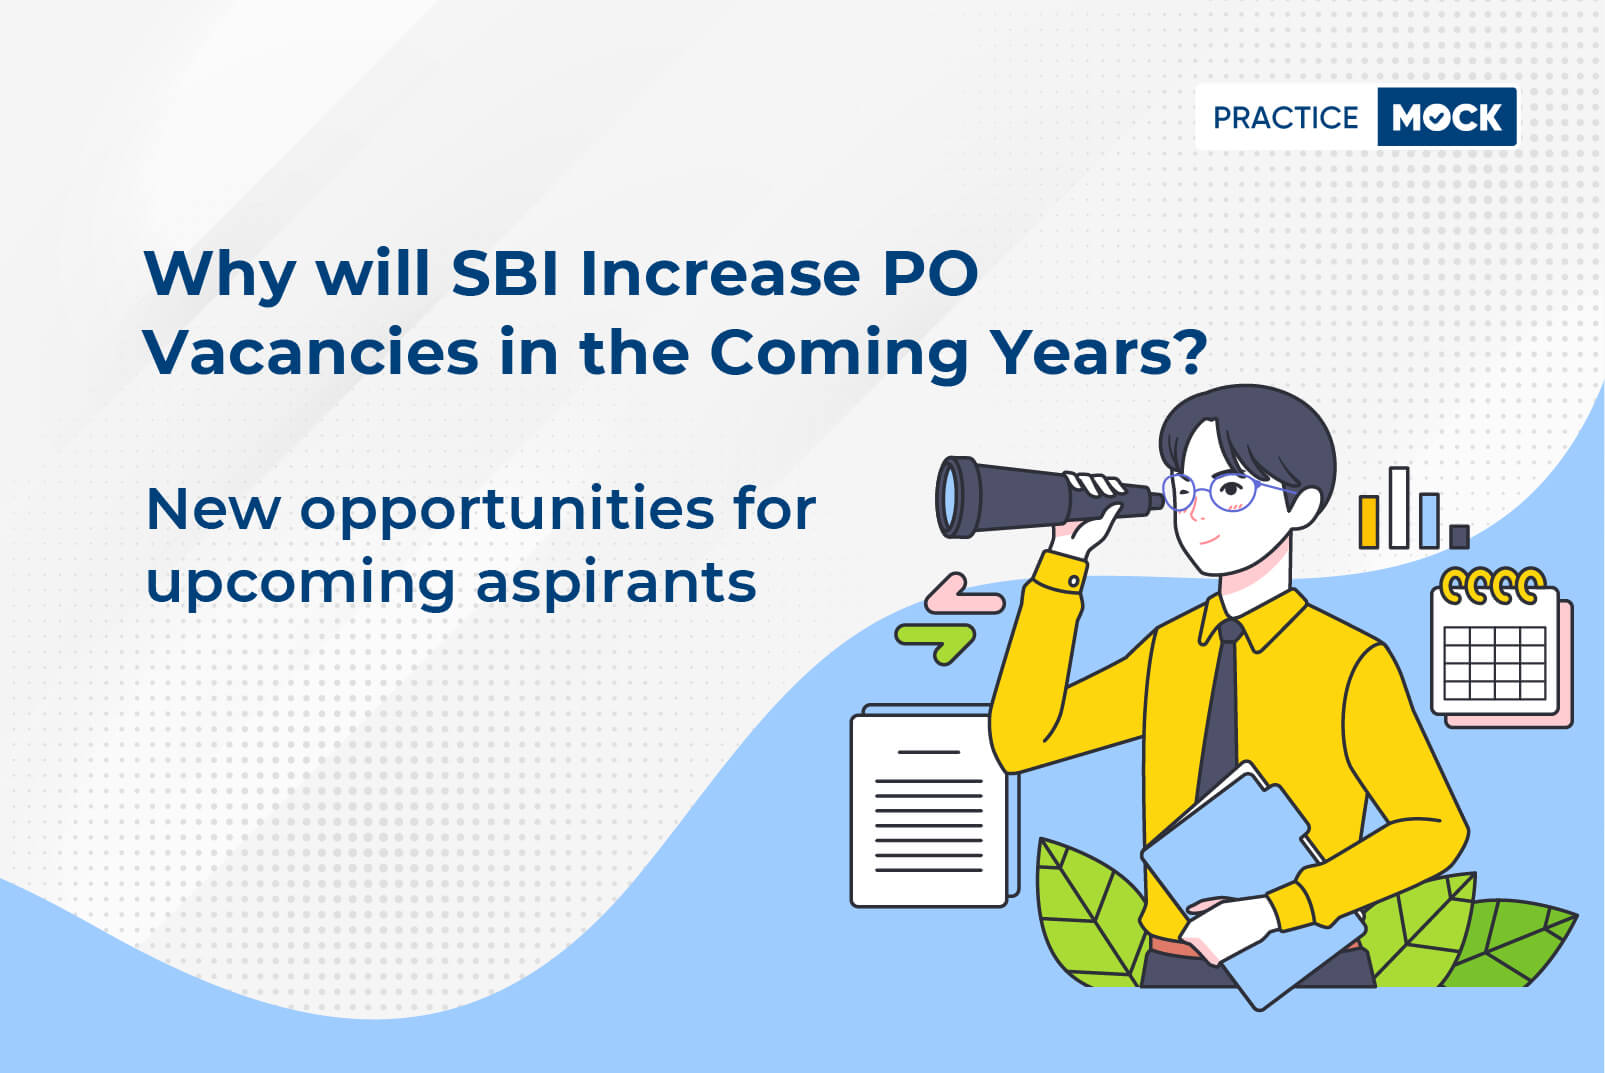 Why will SBI PO vacancies increase in the coming years?